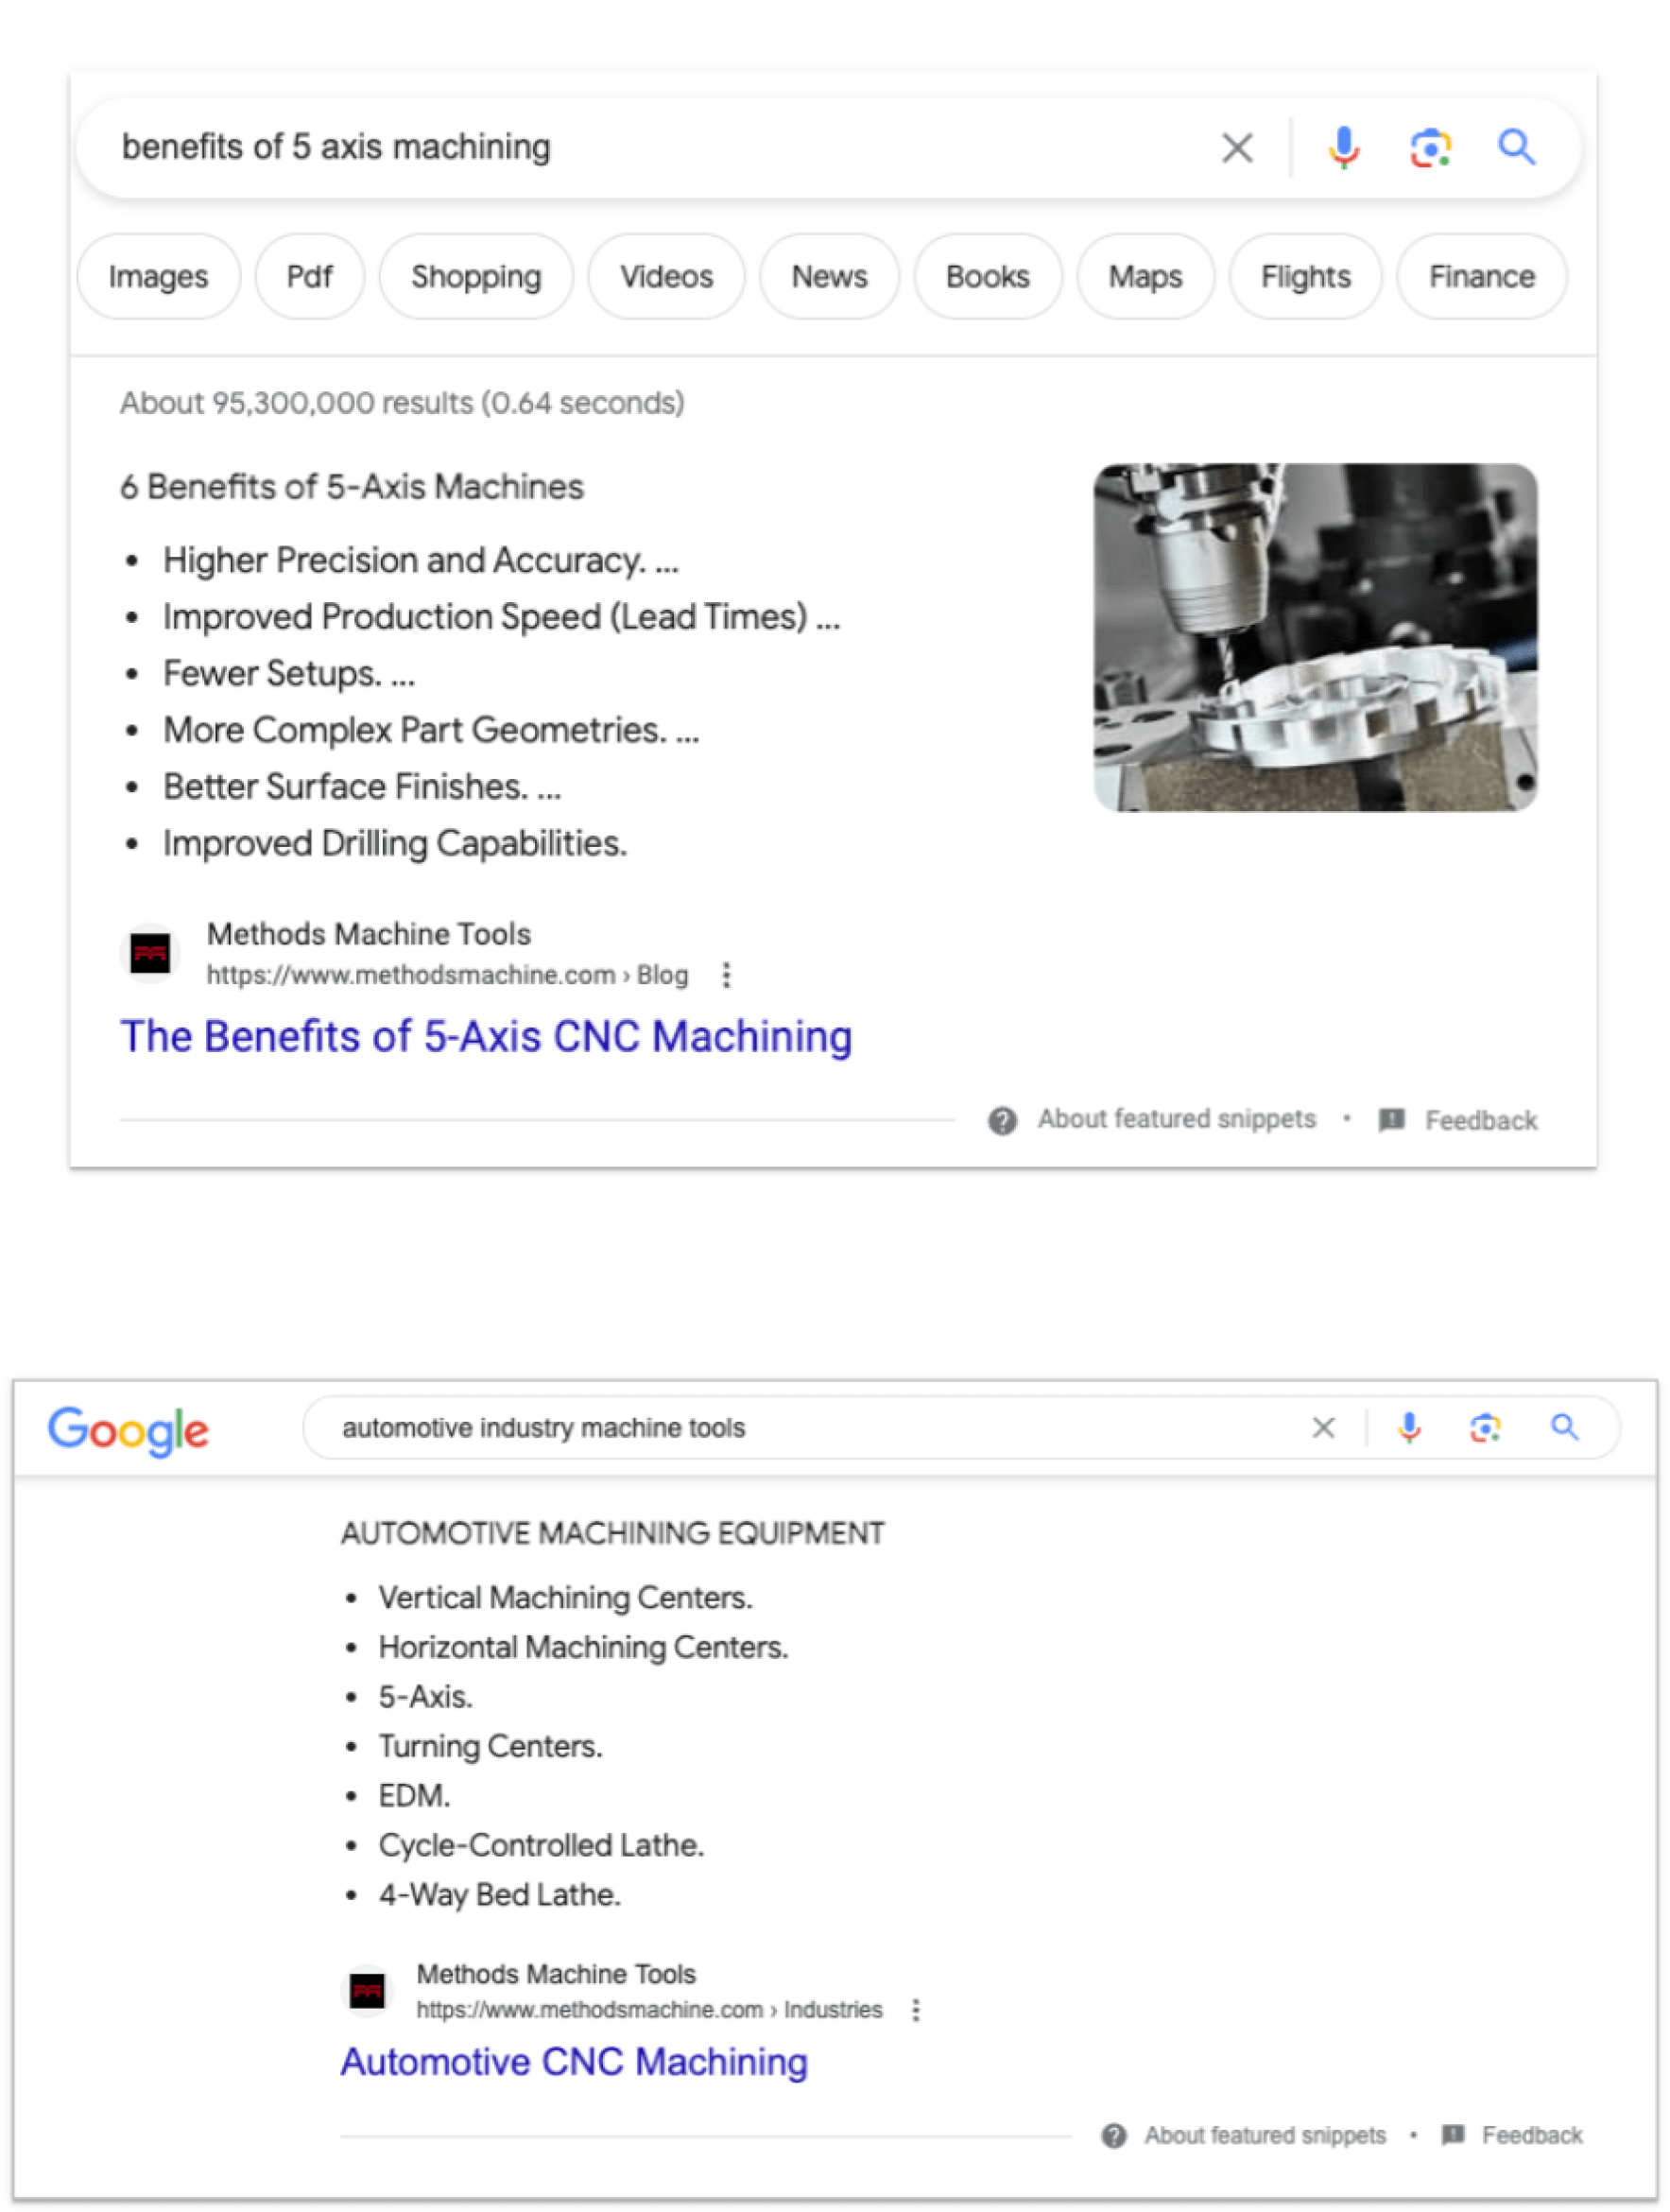 two screenshots stacked vertically of Google search results, each showing a different search term and the top result